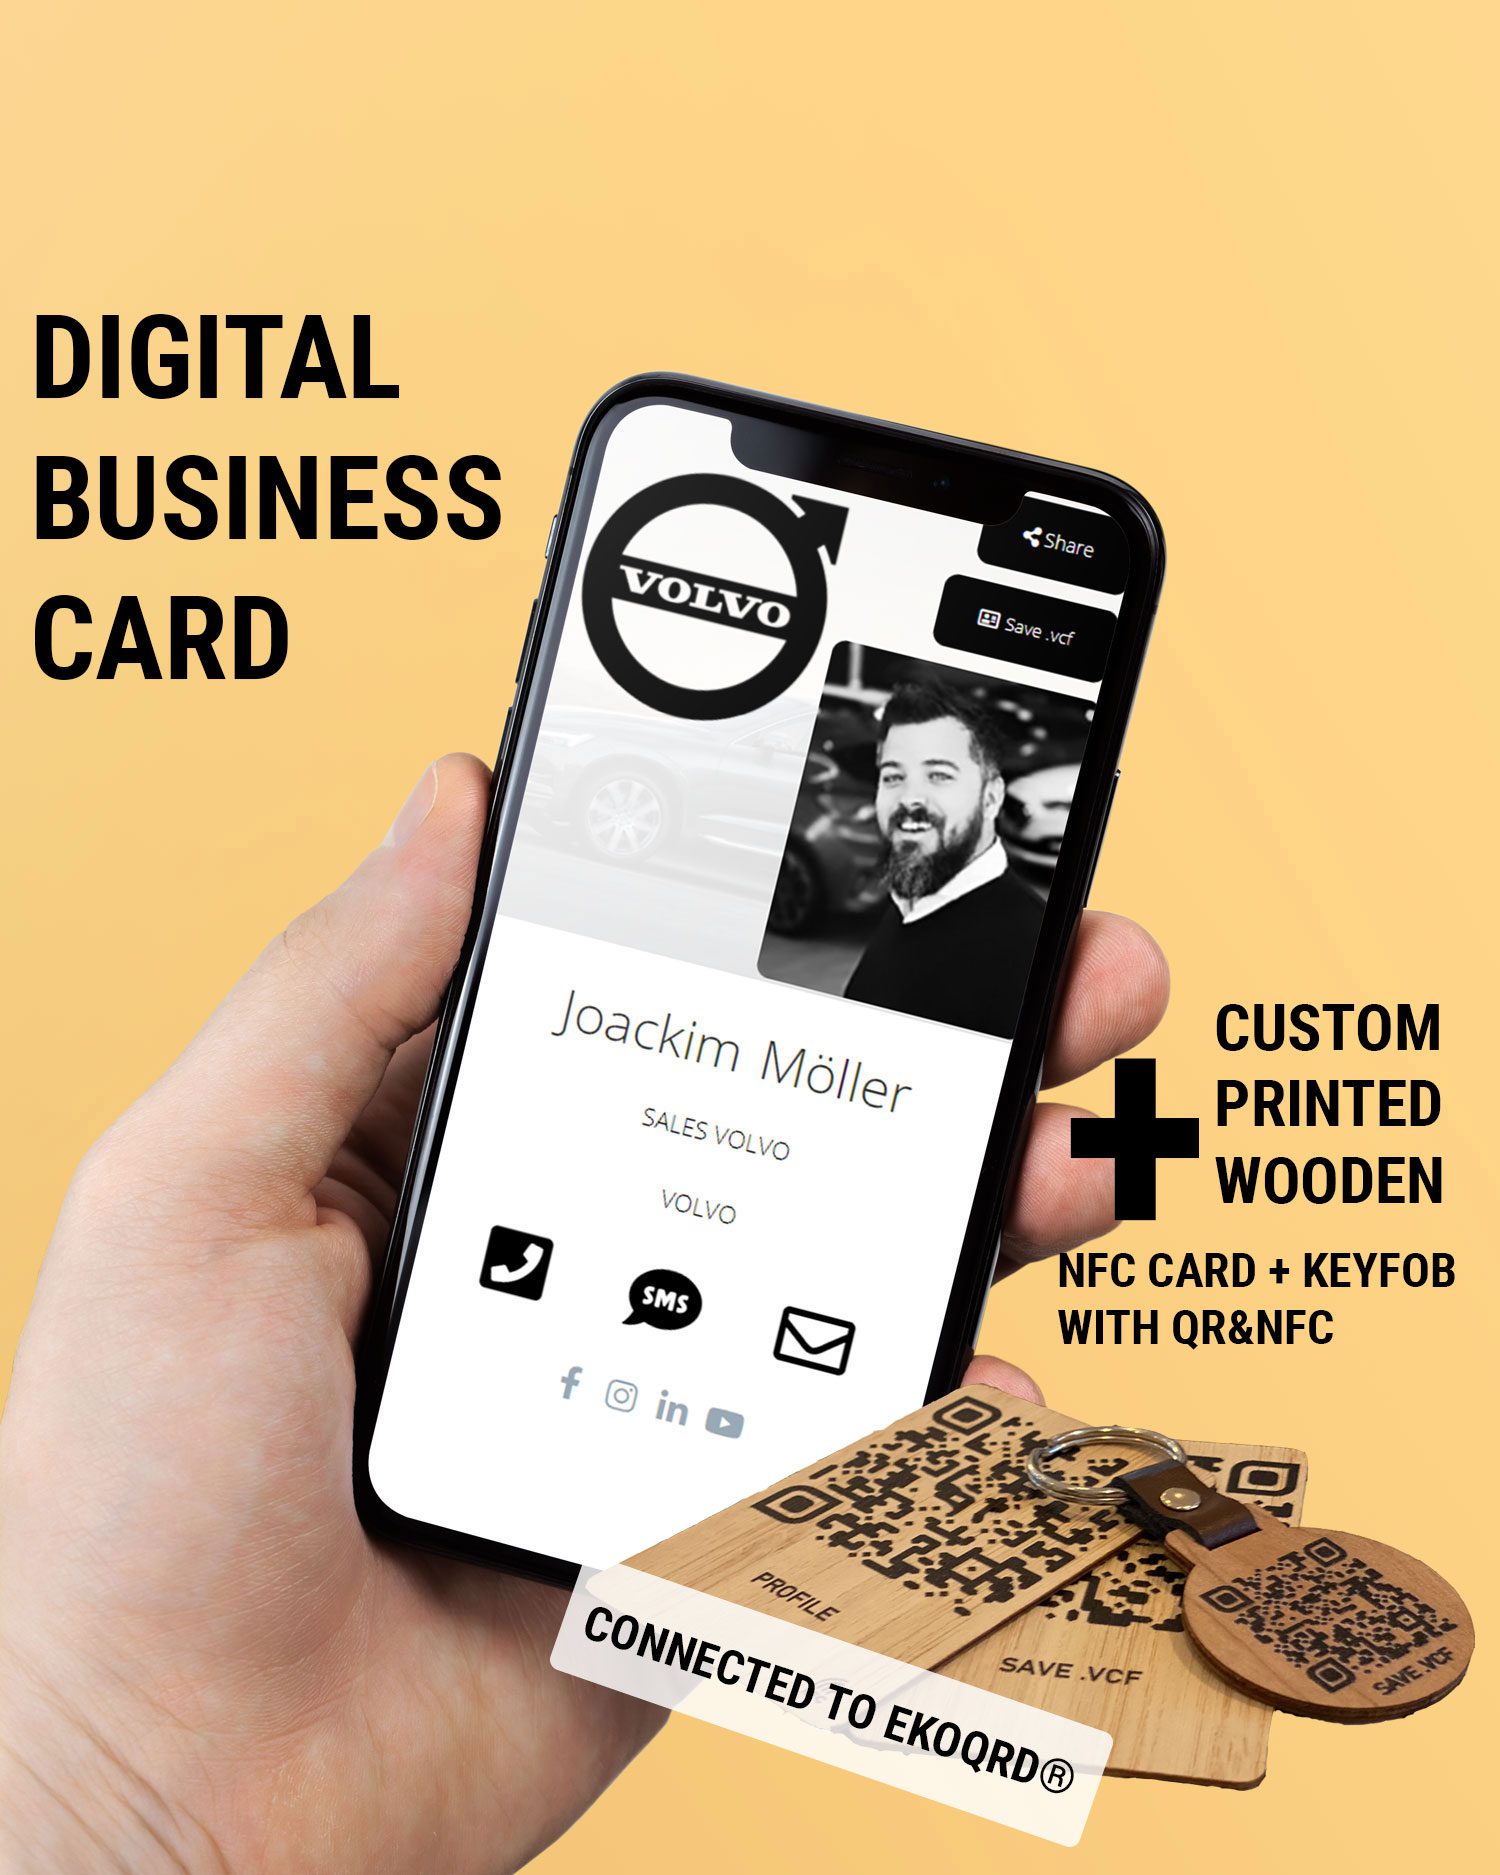 NFC DIGITAL BUSINESS CARD WITH WOODEN NFC/QR CARD AND KEYFOB